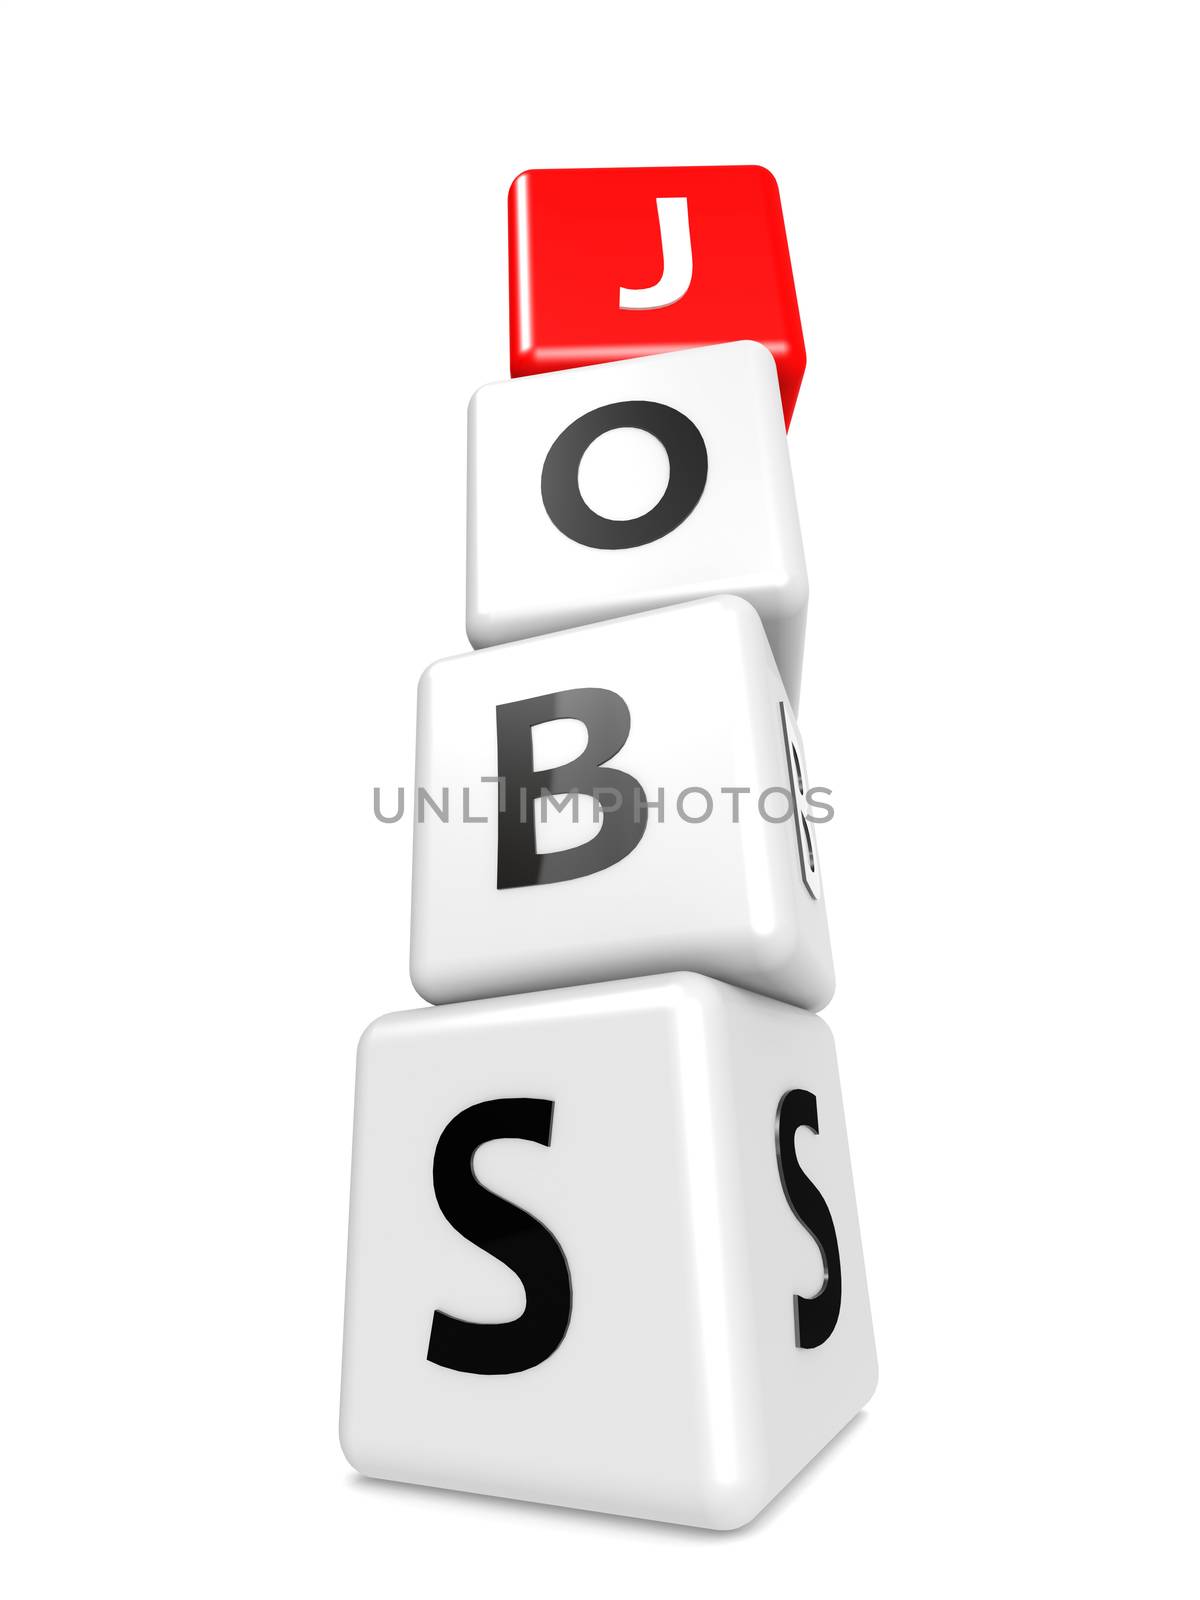 Buzzword jobs concept image with hi-res rendered artwork that could be used for any graphic design.